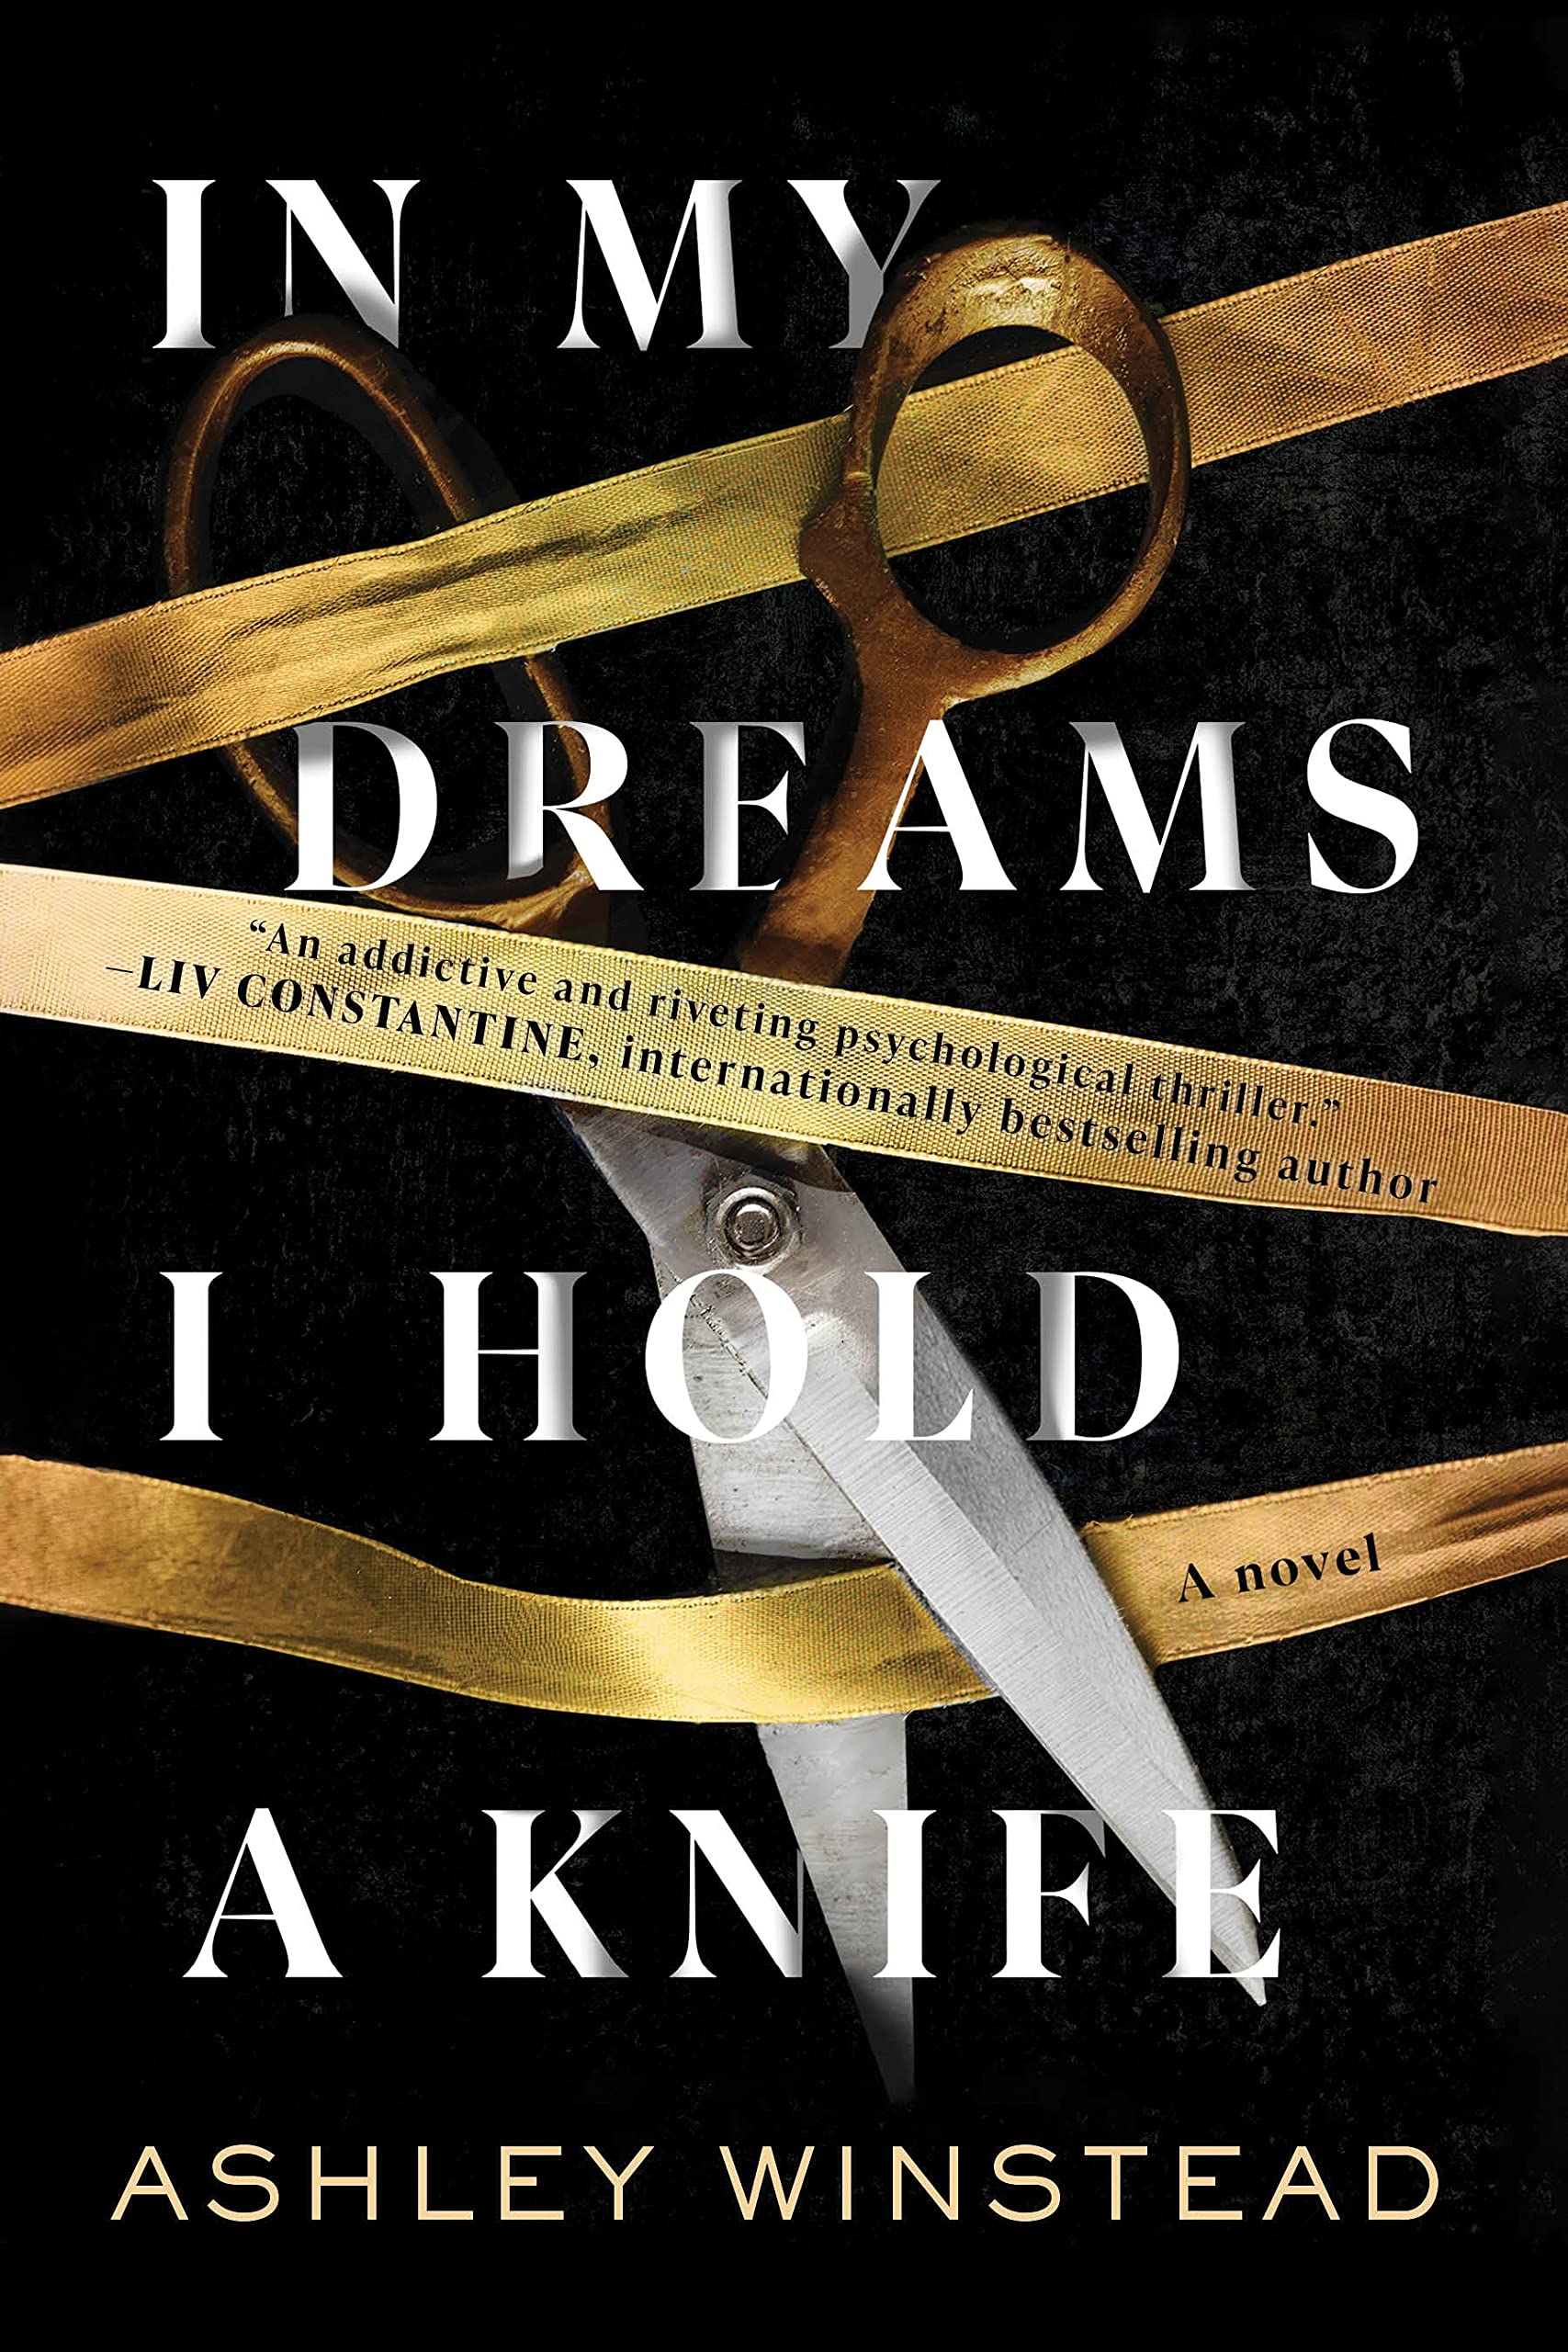 Image for "In My Dreams I Hold a Knife"